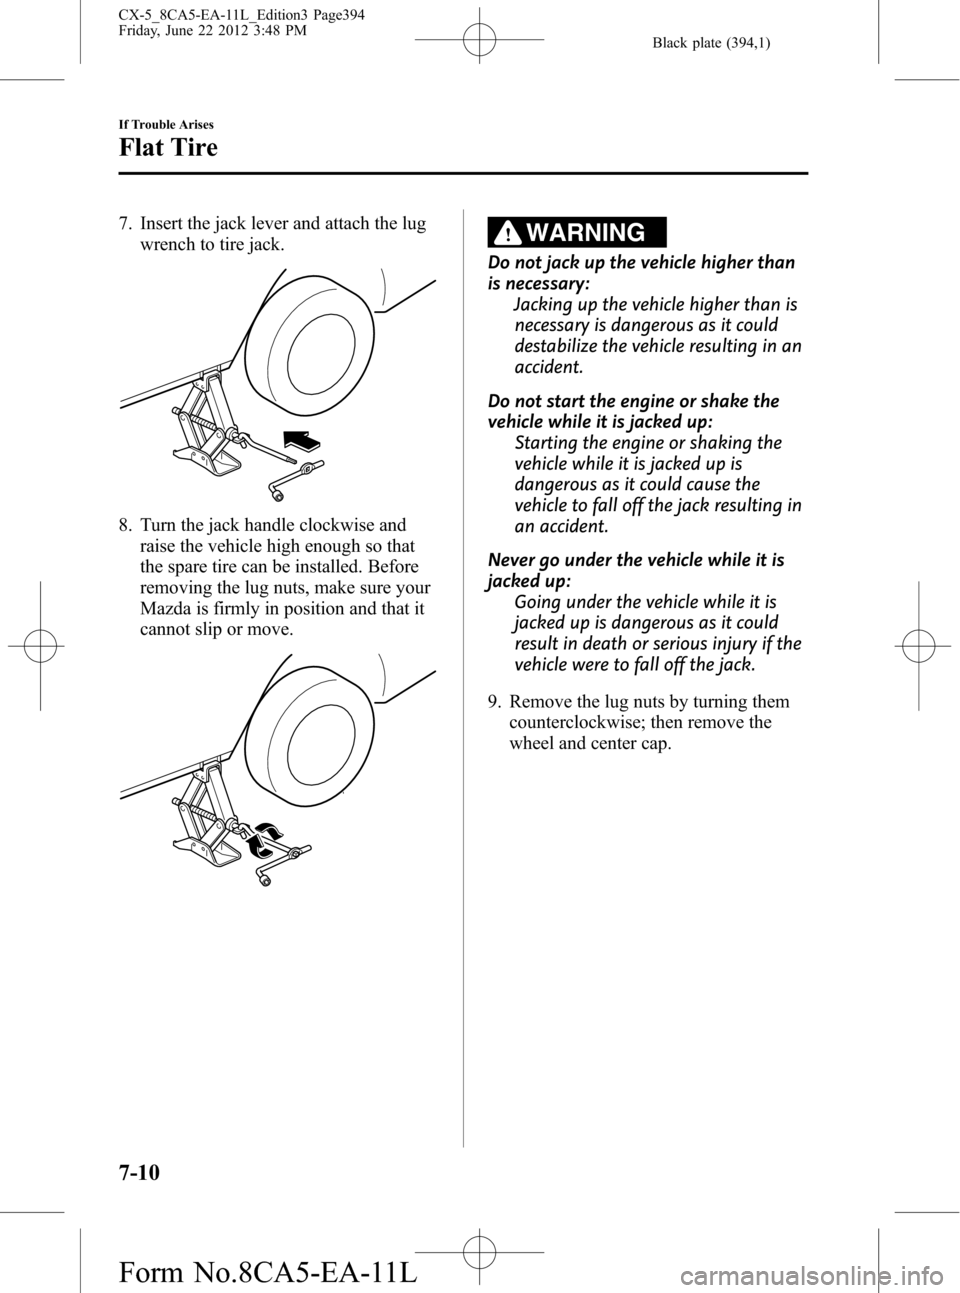 MAZDA MODEL CX-5 2013  Owners Manual (in English) Black plate (394,1)
7. Insert the jack lever and attach the lug
wrench to tire jack.
8. Turn the jack handle clockwise and
raise the vehicle high enough so that
the spare tire can be installed. Before